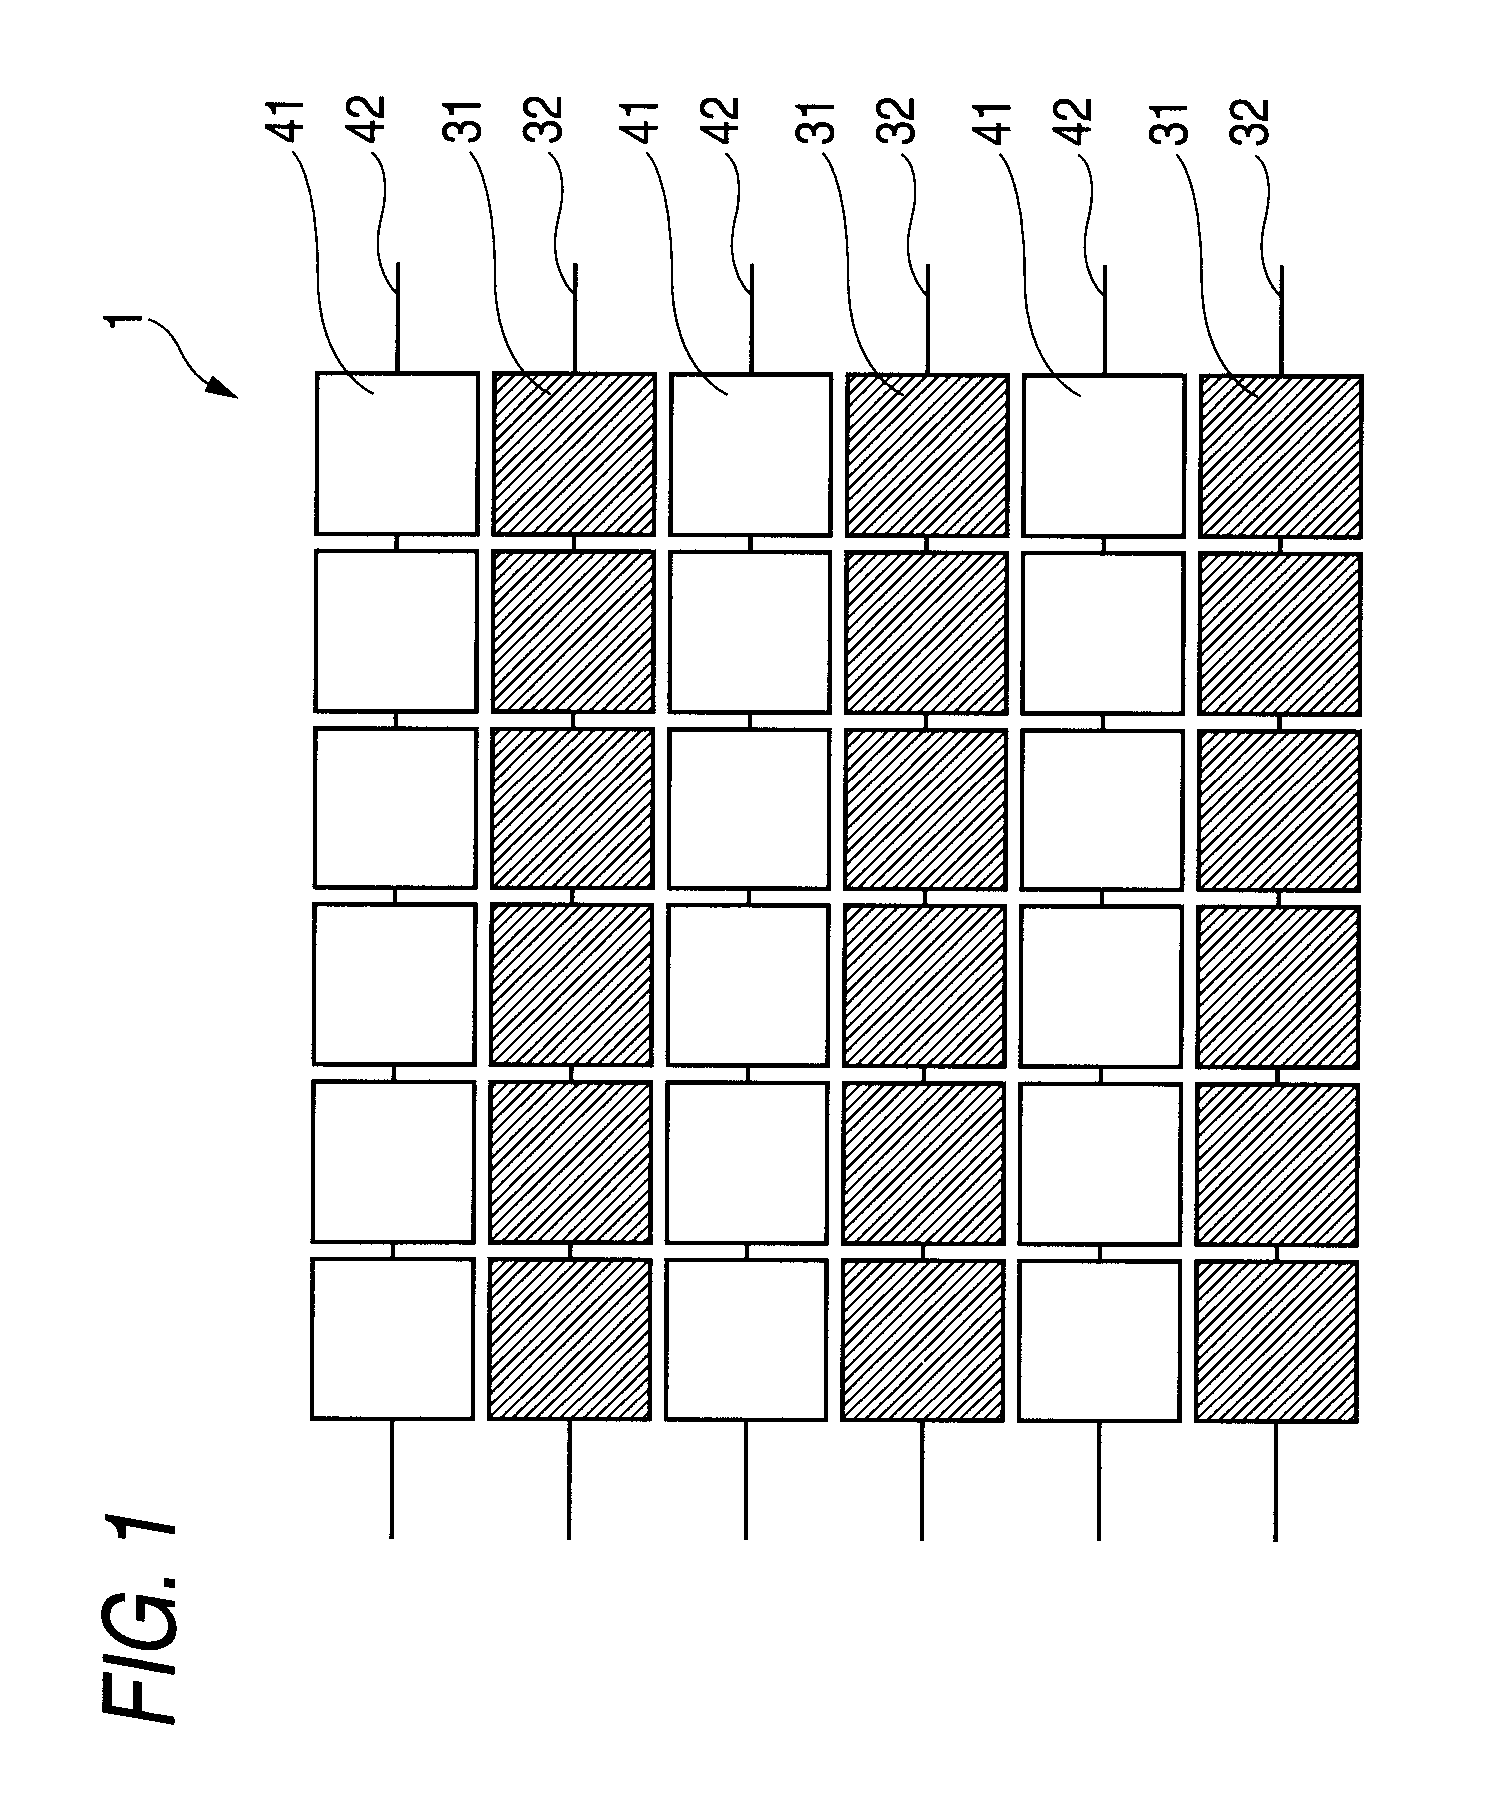 Solid-state imaging device, method for driving solid-state imaging device and camera